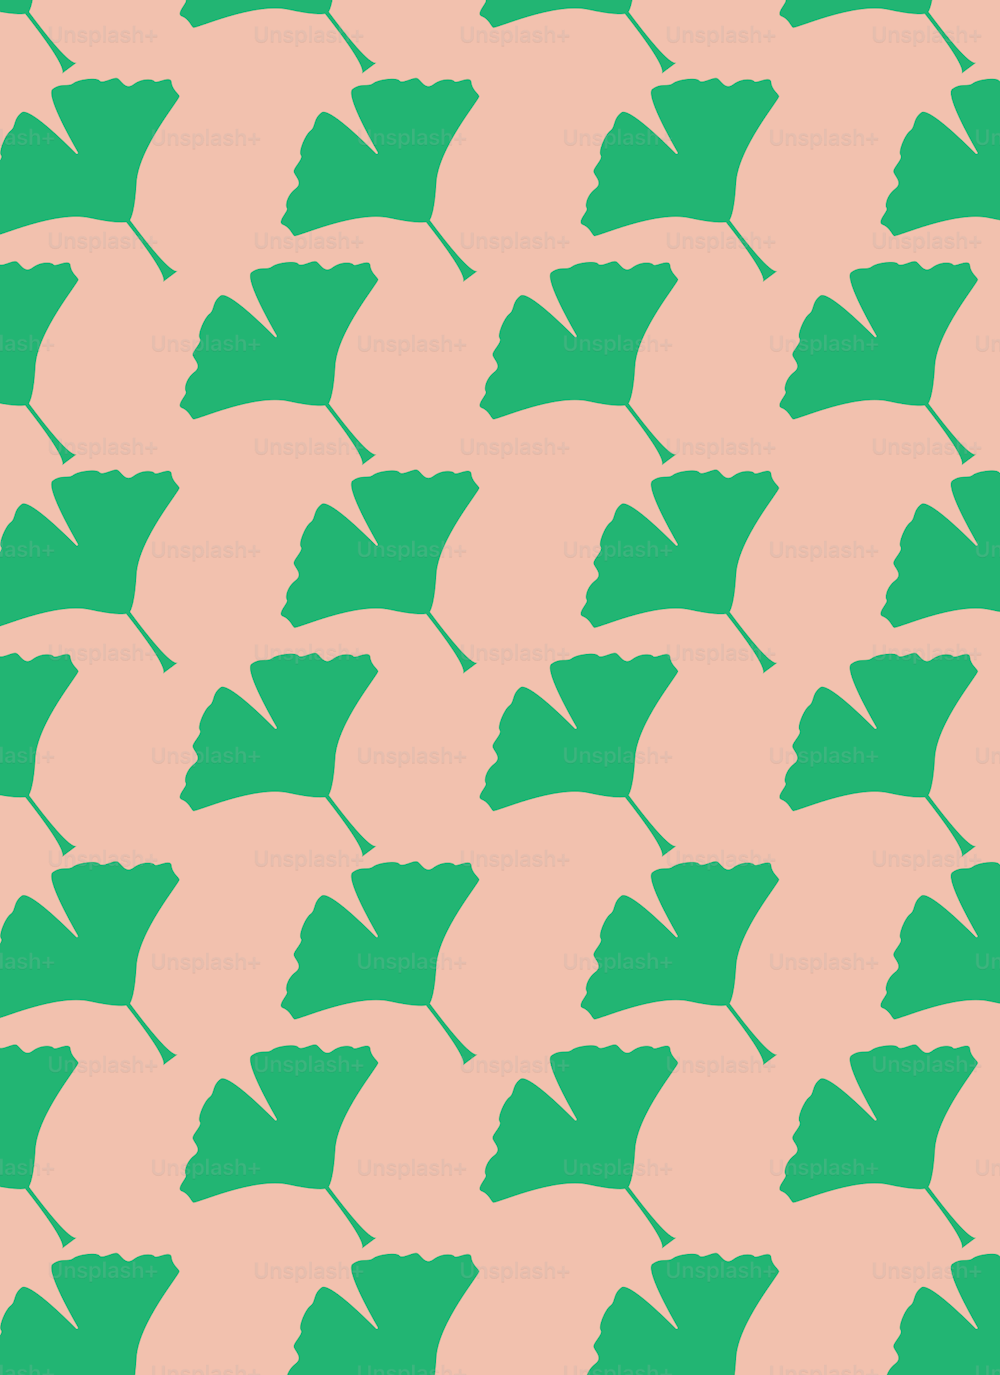 a pattern of green leaves on a pink background